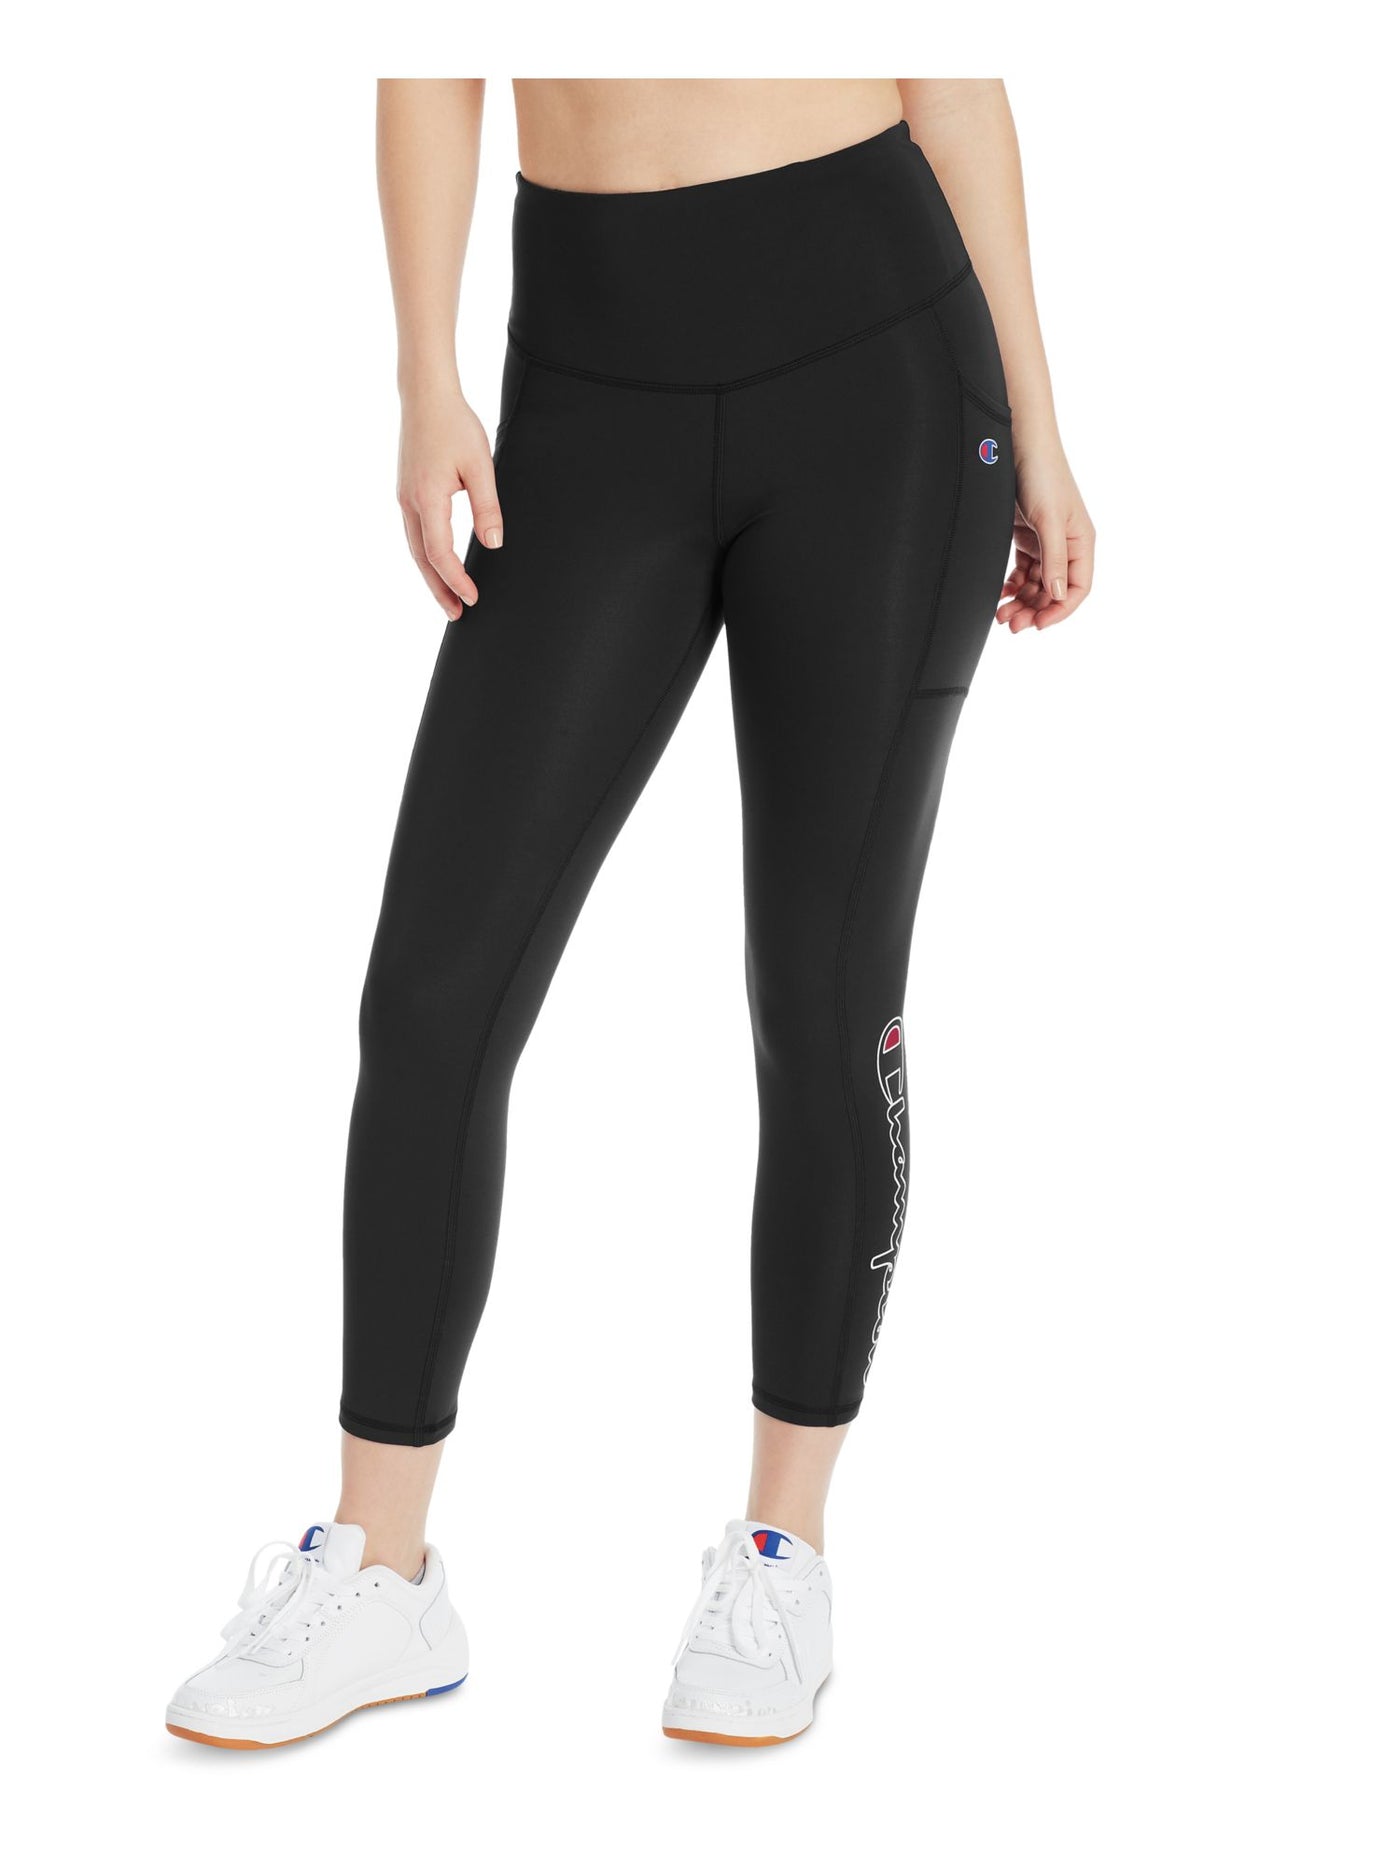 CHAMPION Womens Black Moisture Wicking Pocketed Fitted Compression Color Block High Waist Leggings XS